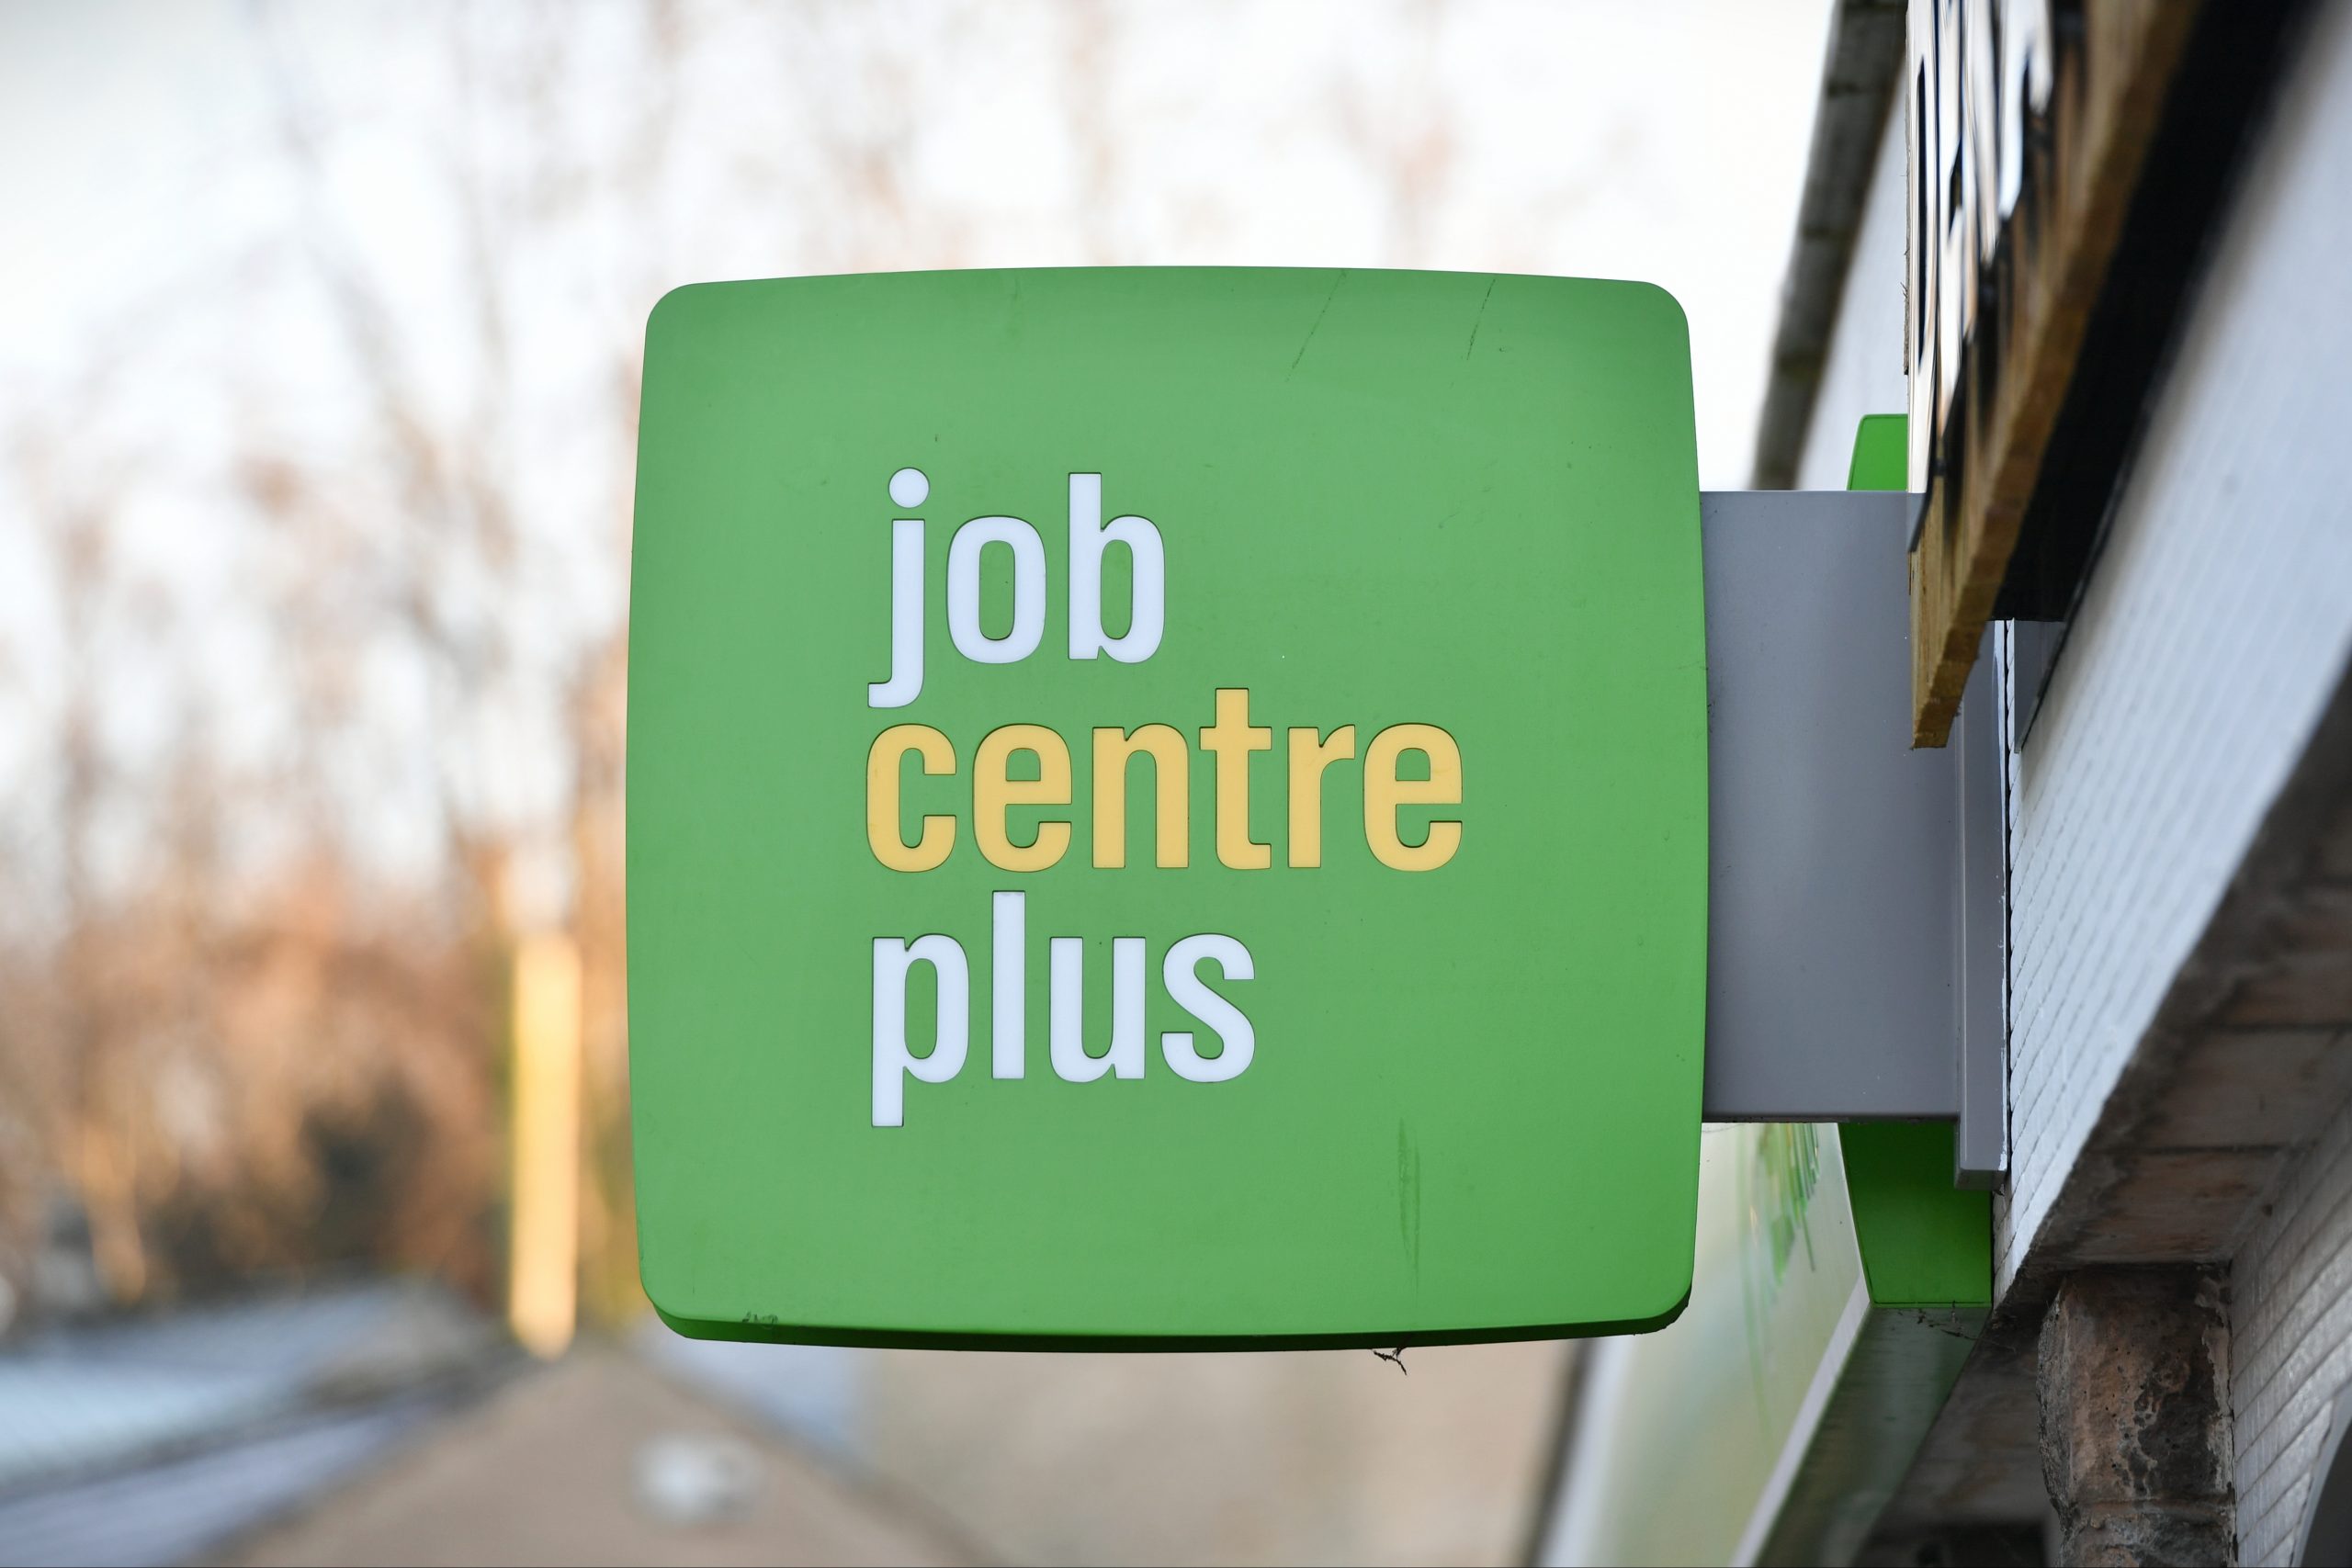 UK: Taxpayers deserve a level playing field between HMRC and Jobcentre Plus